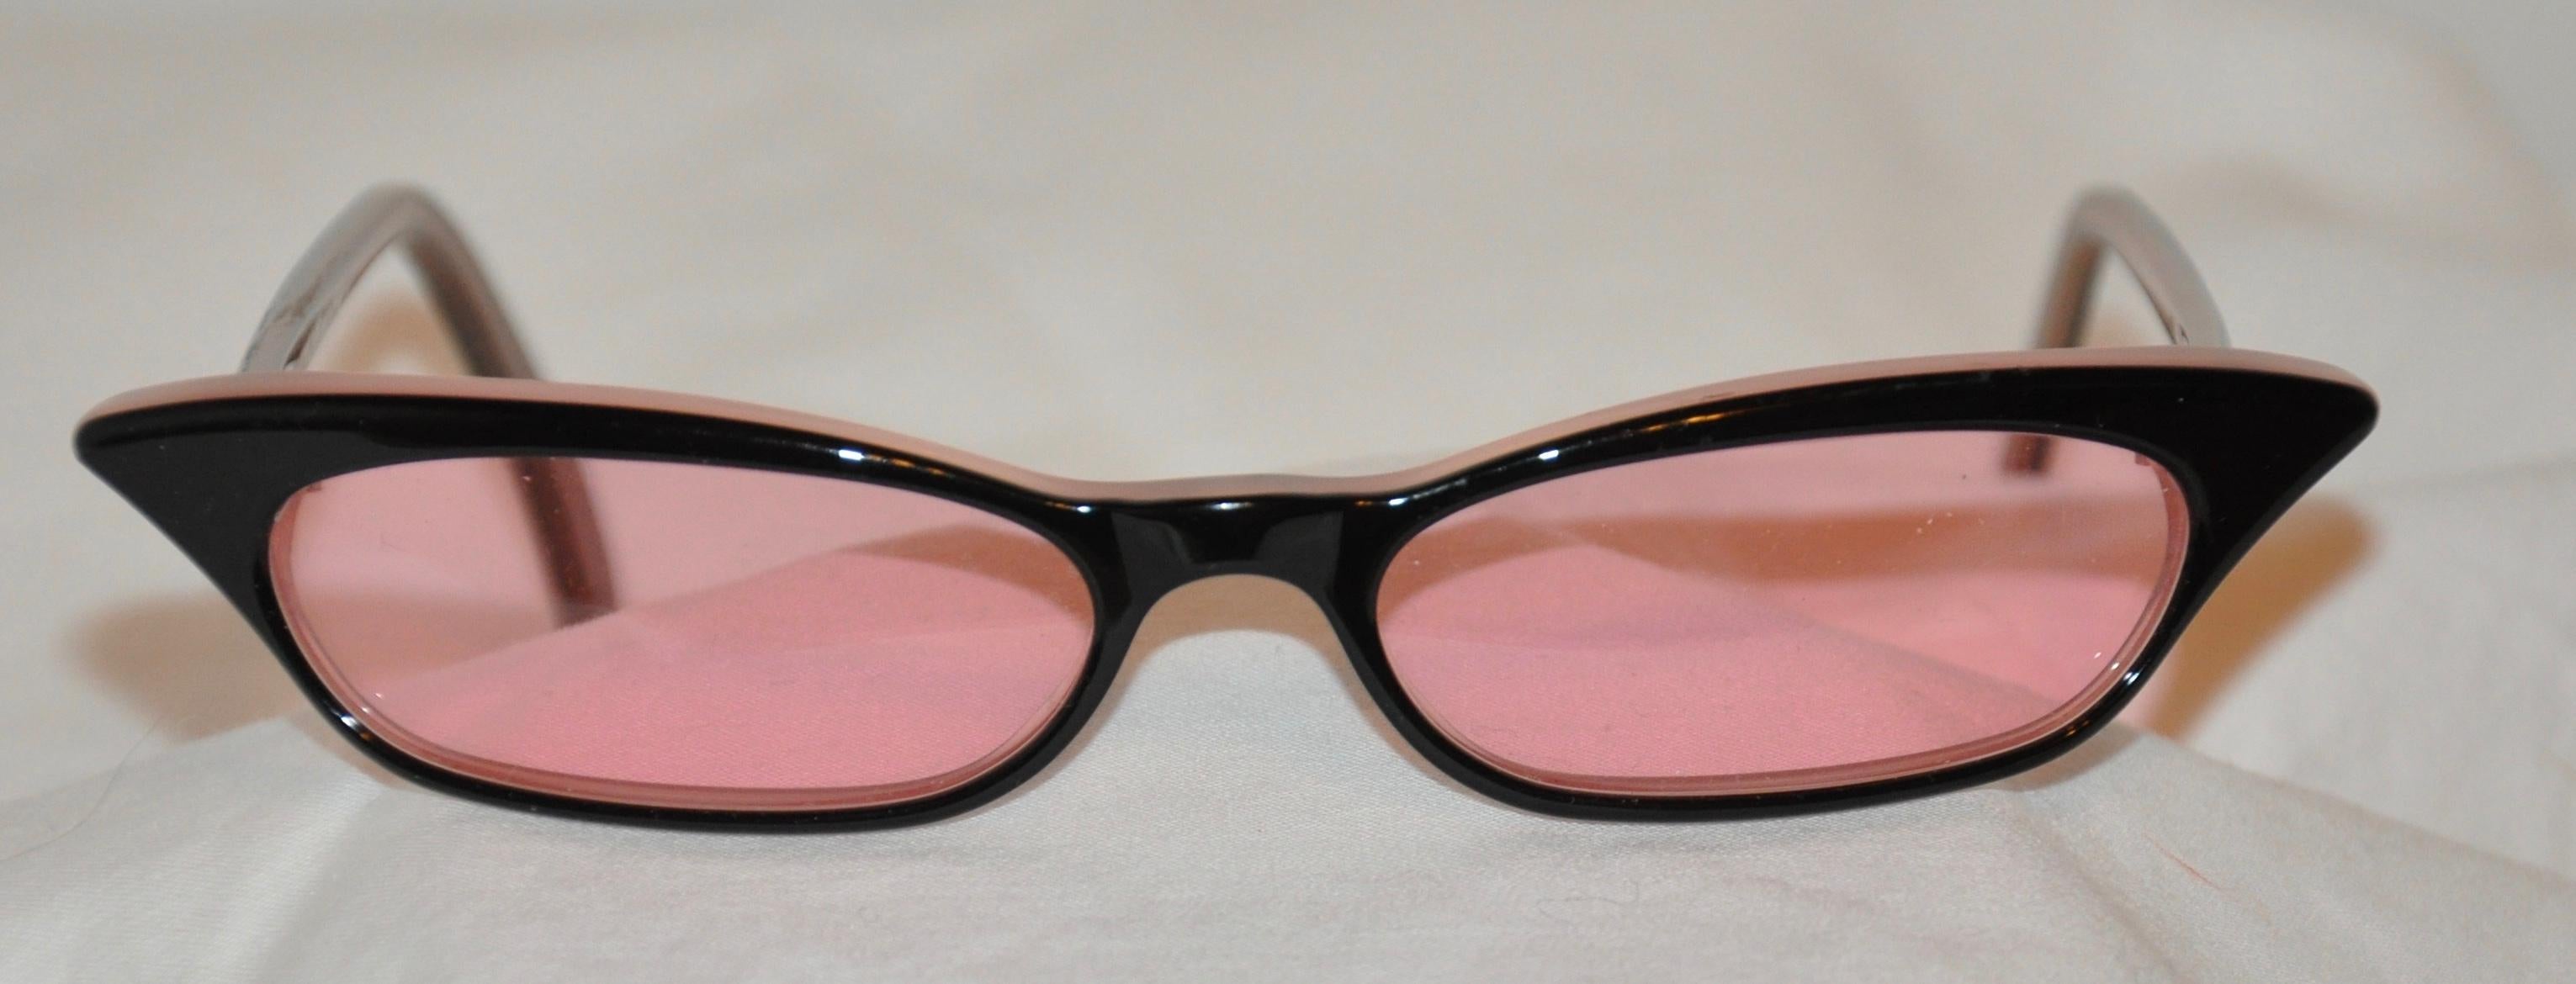 Jean Lafont beautifully elegant black and rose lucite 'Cat-Eye' styled frames are accented with rose-hue lens. Made in France, the front measures 5 3/8 inches across, height measures 1 inch, and the arms are 5 inches in length.